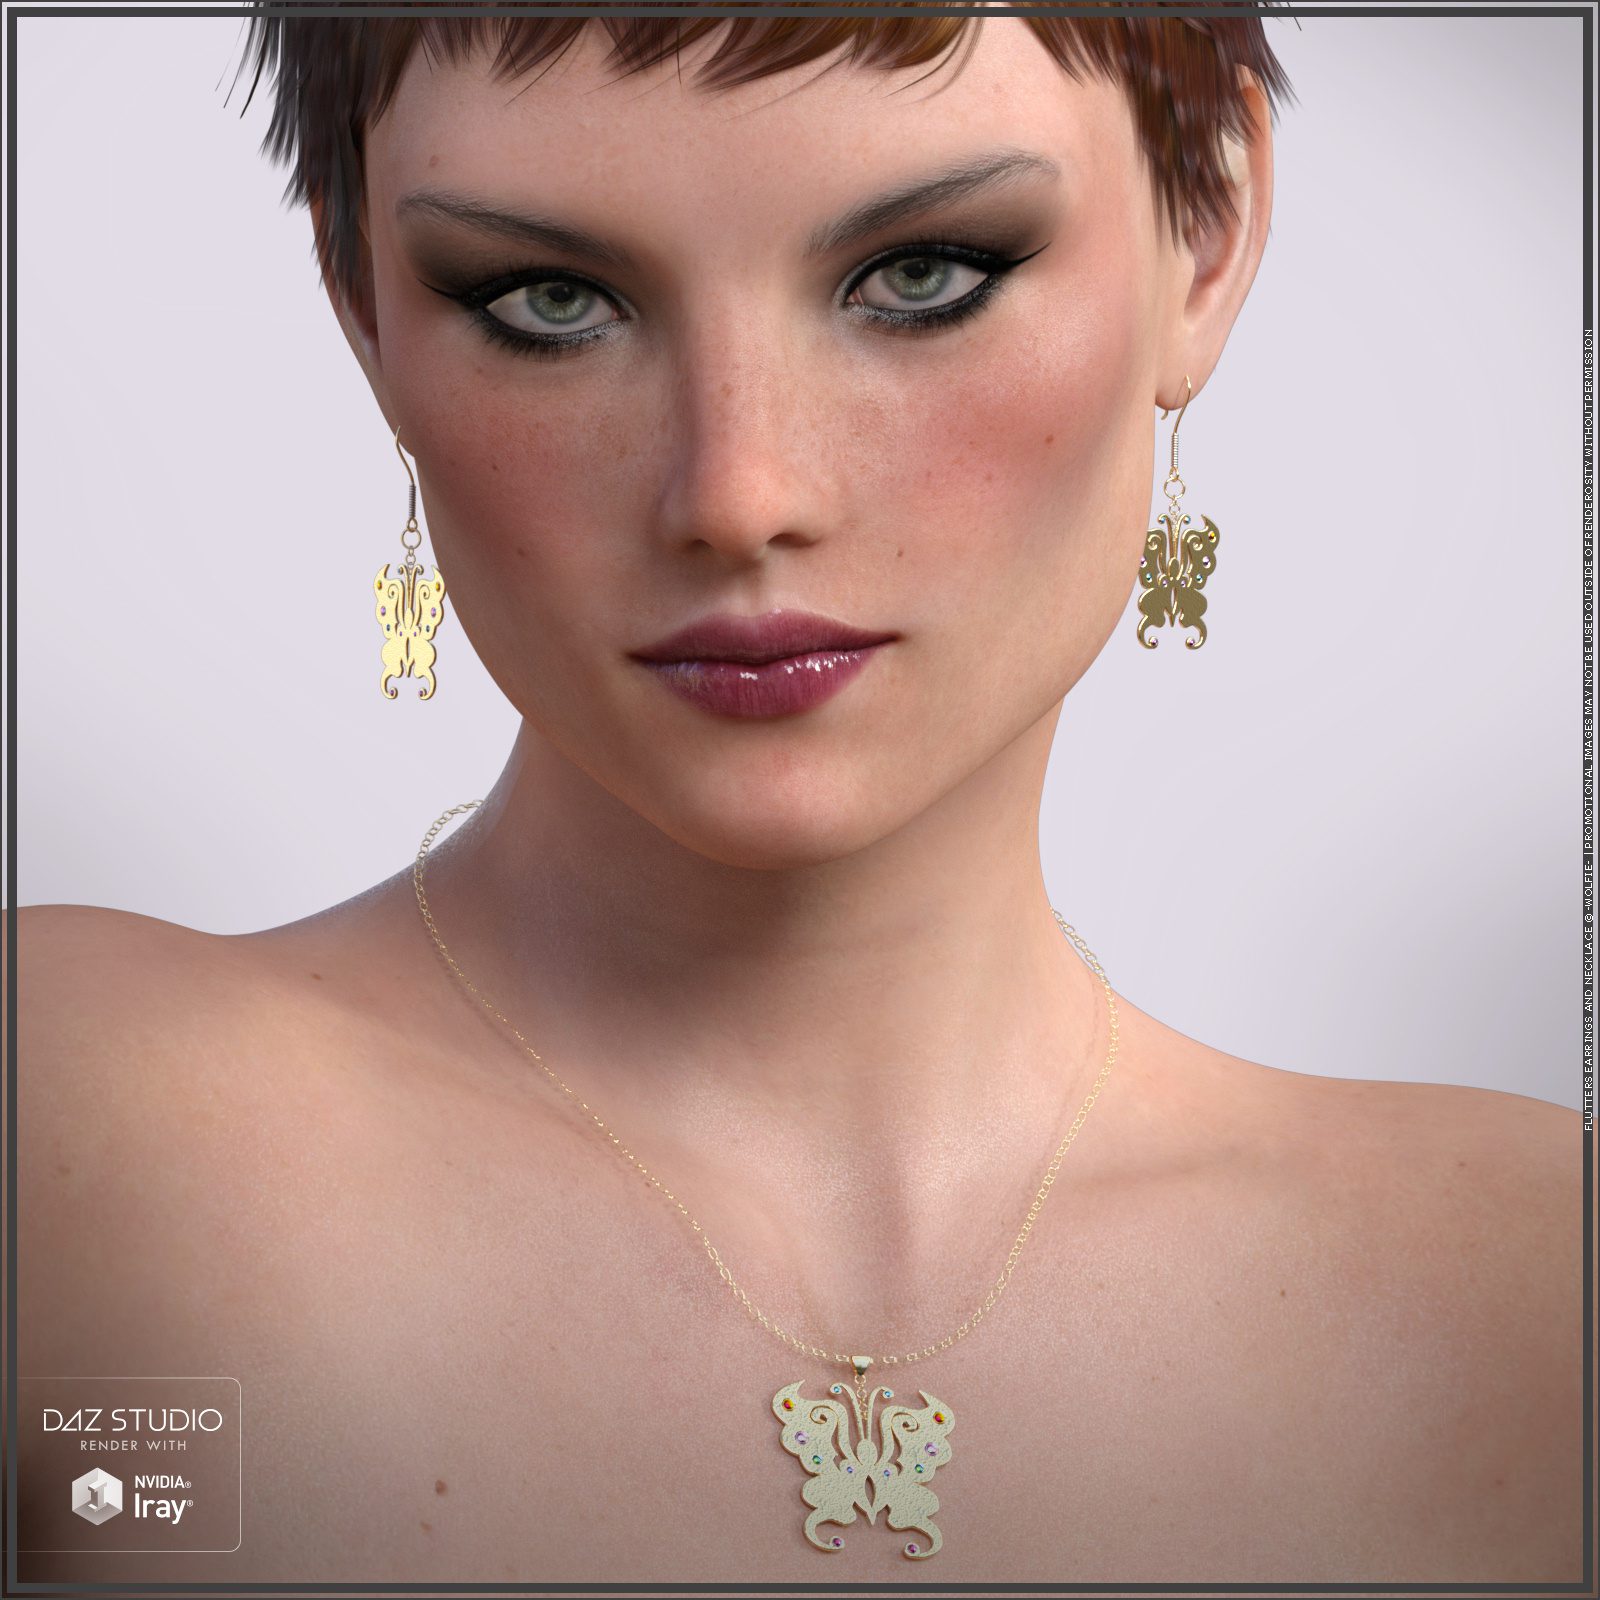 Flutters Earrings and Necklace for G3F G8F_DAZ3D下载站